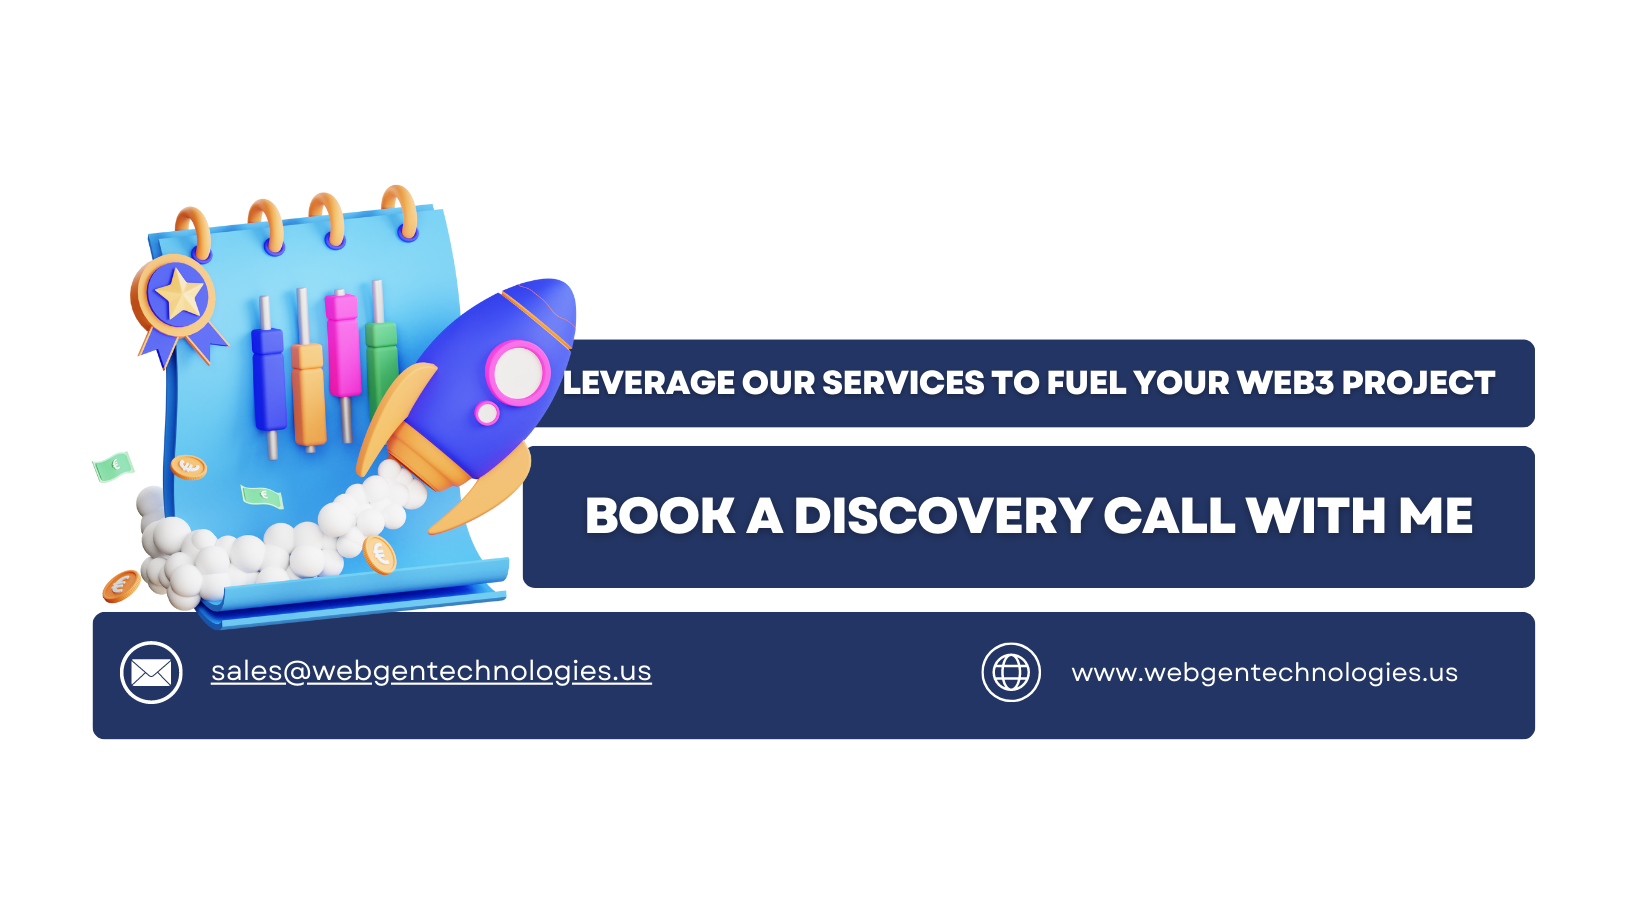 Leverage Our Services To Fuel Your Web3 Project